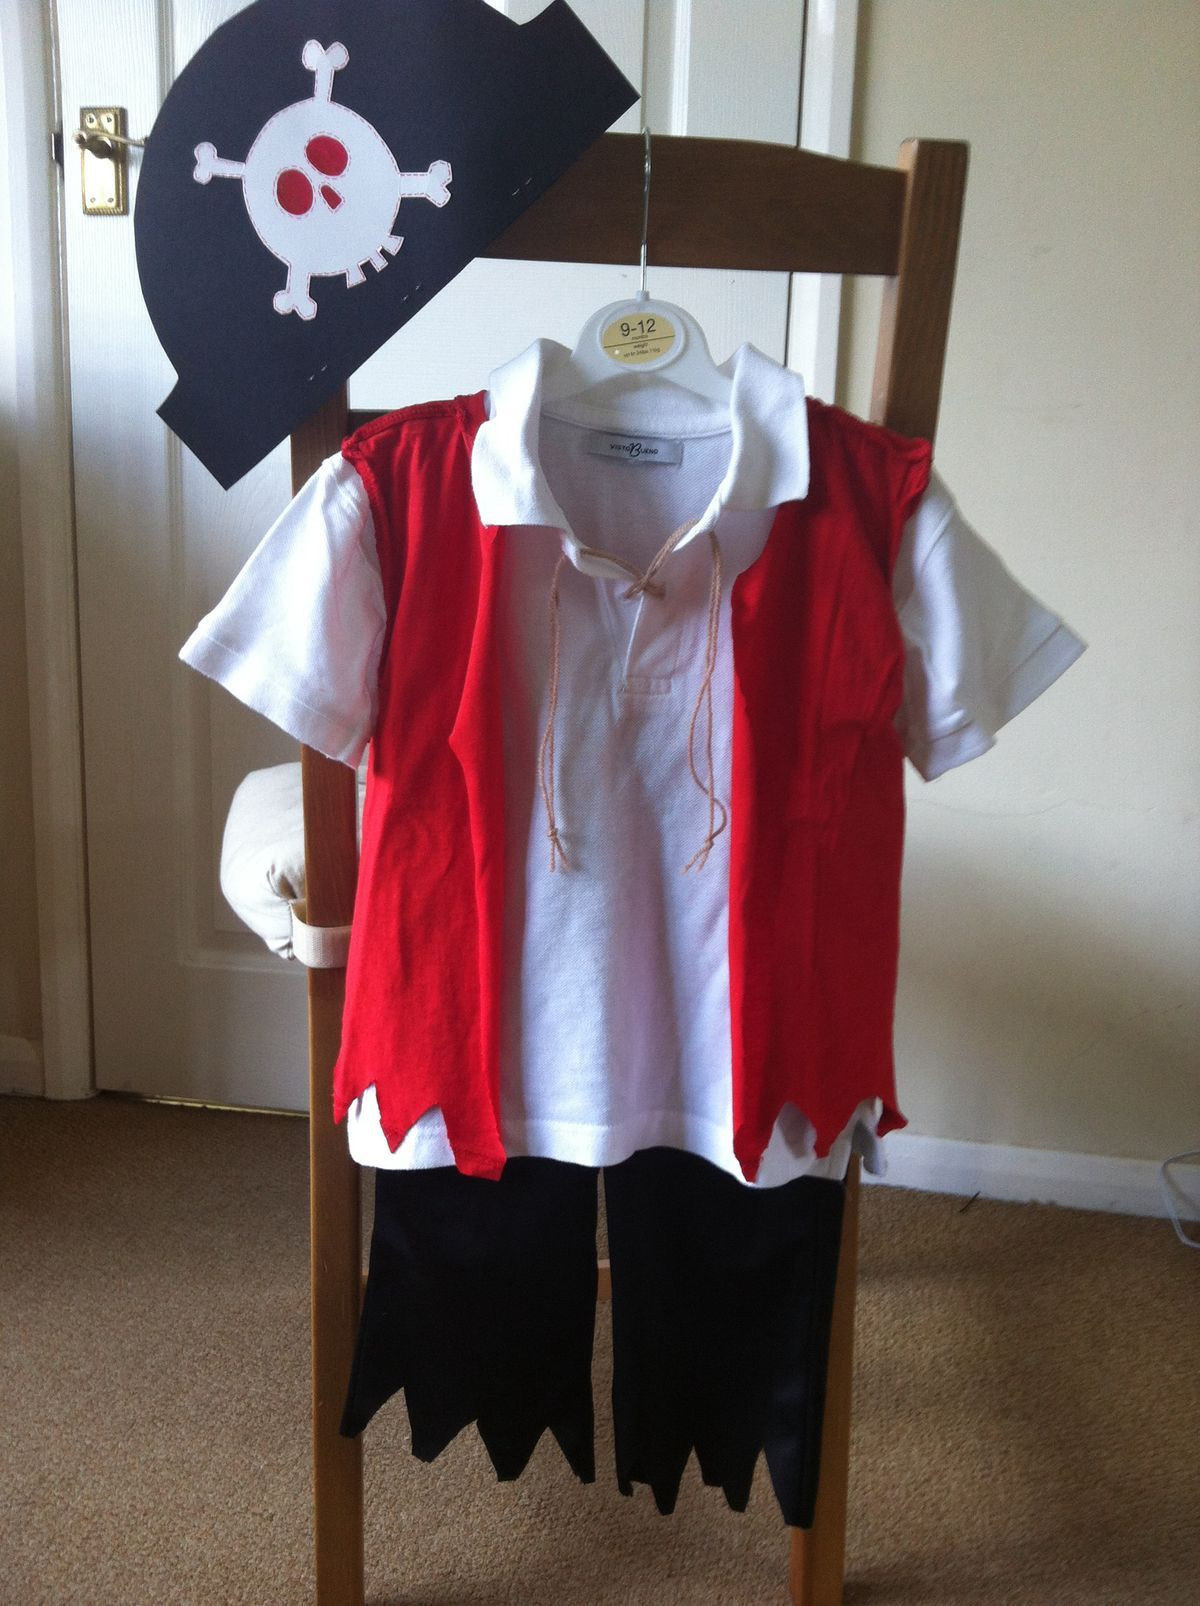 DIY Pirate Costumes For Kids
 Pin by Tracy Cleveland on Kid stuff